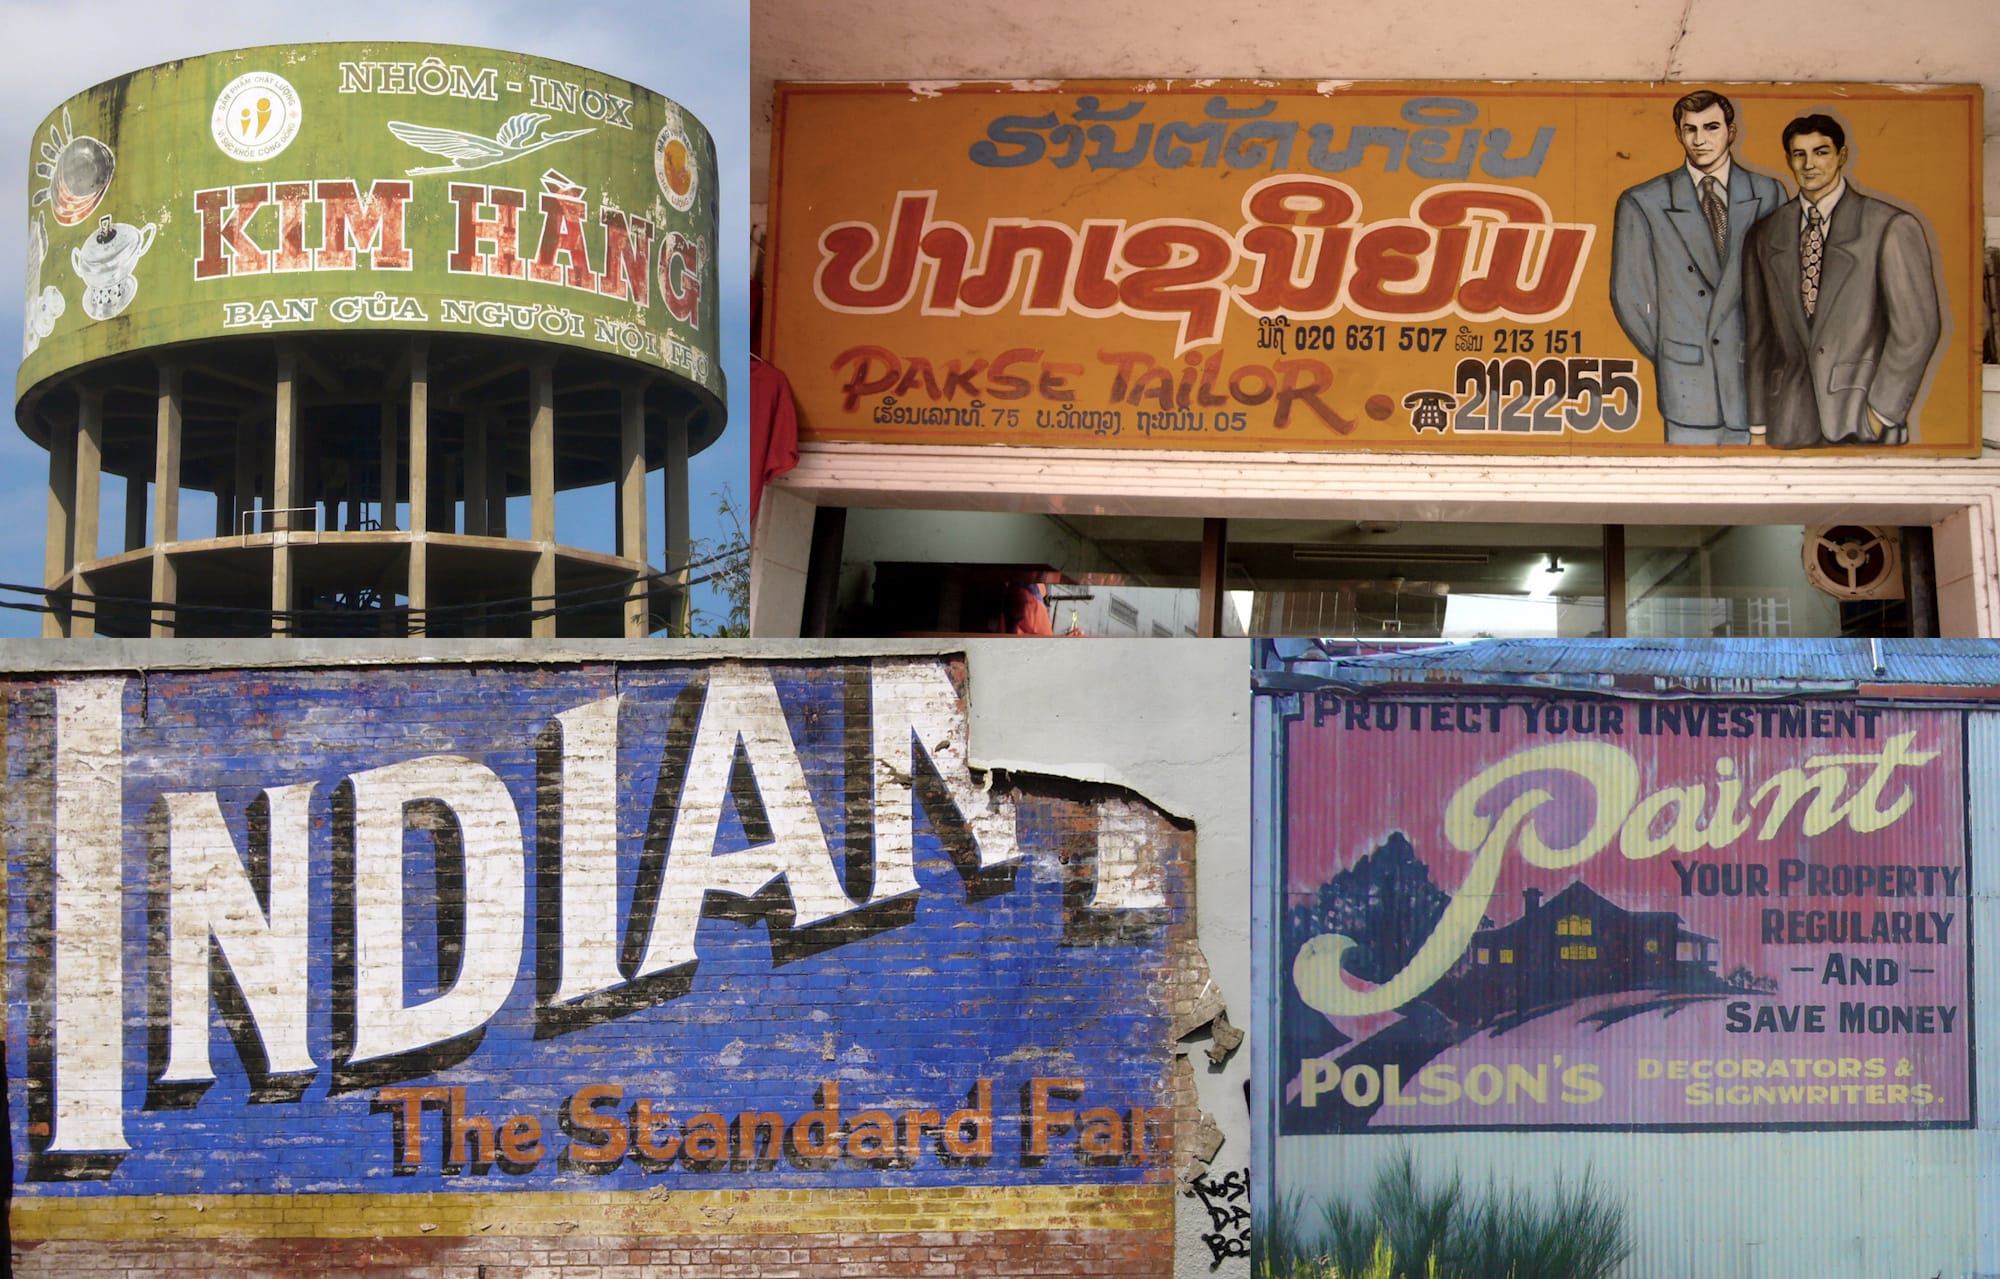 Array of four photos showing hand-painted signs on top of a tower, a shopfront, a wall, and a corrugated siding respectively.